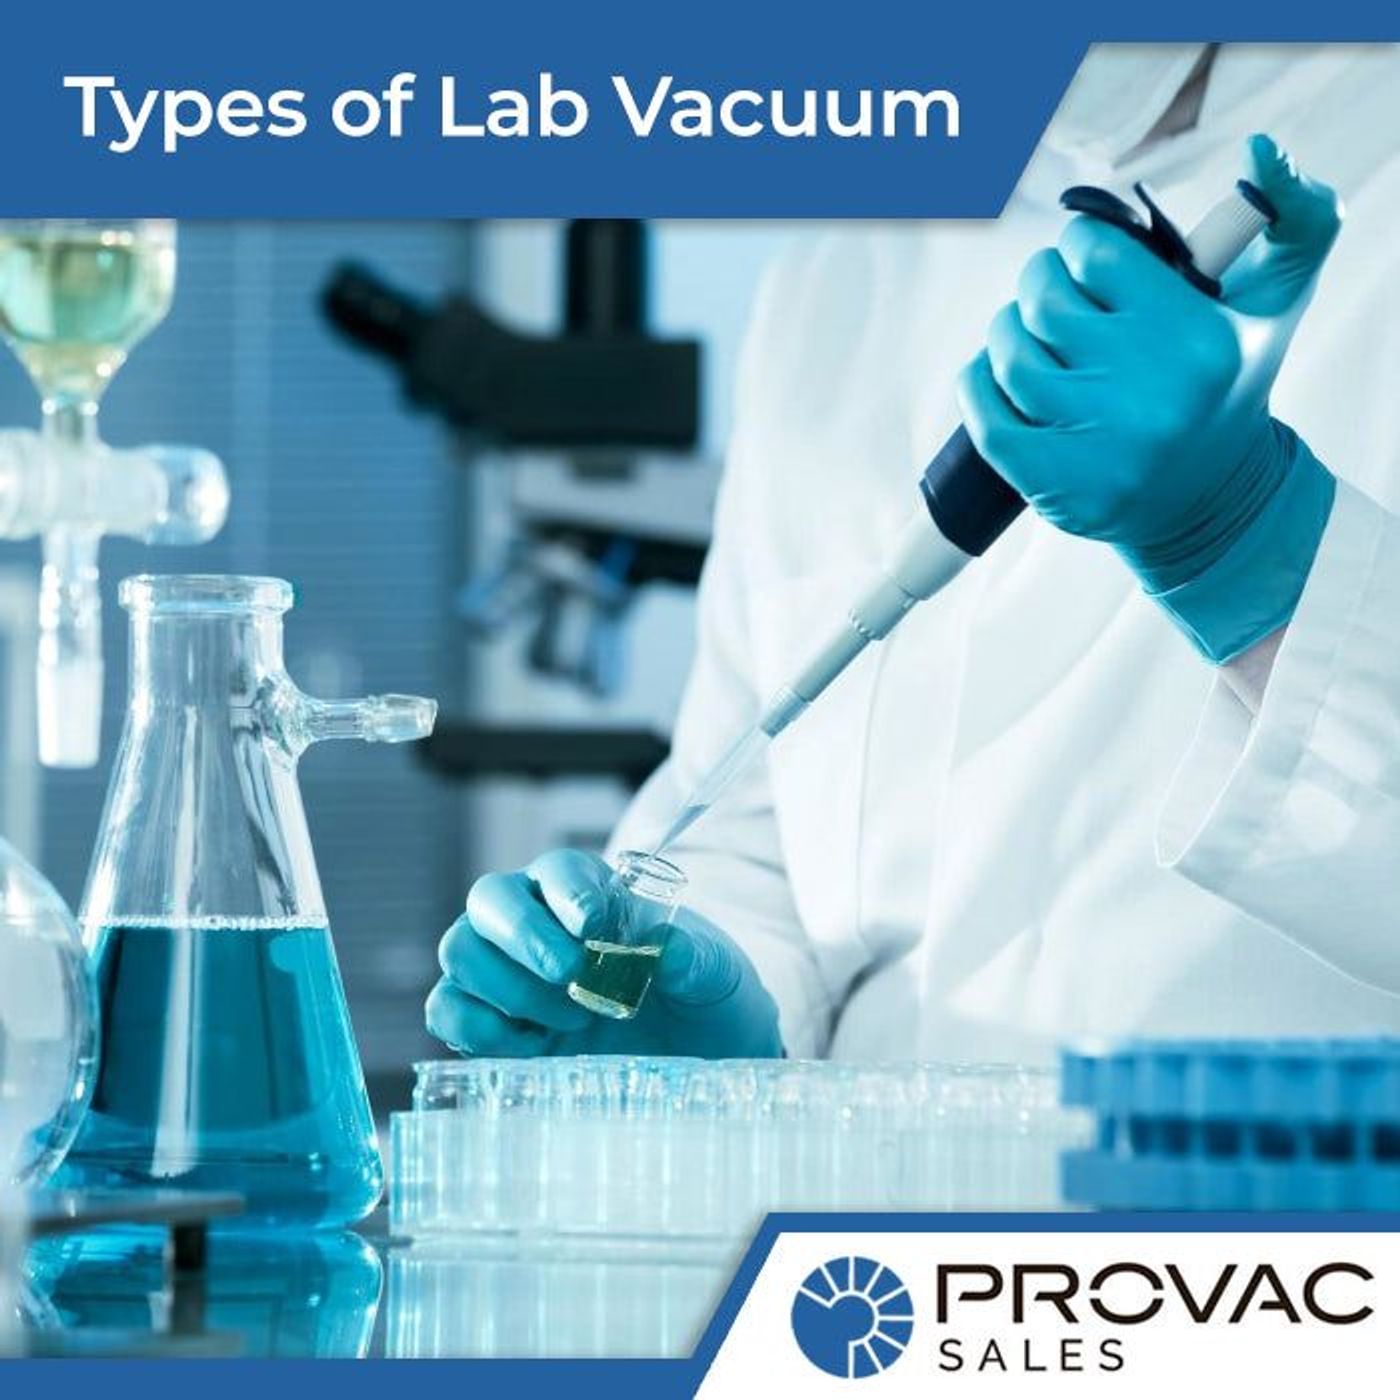 Types of Vacuum Pumps for a Laboratory